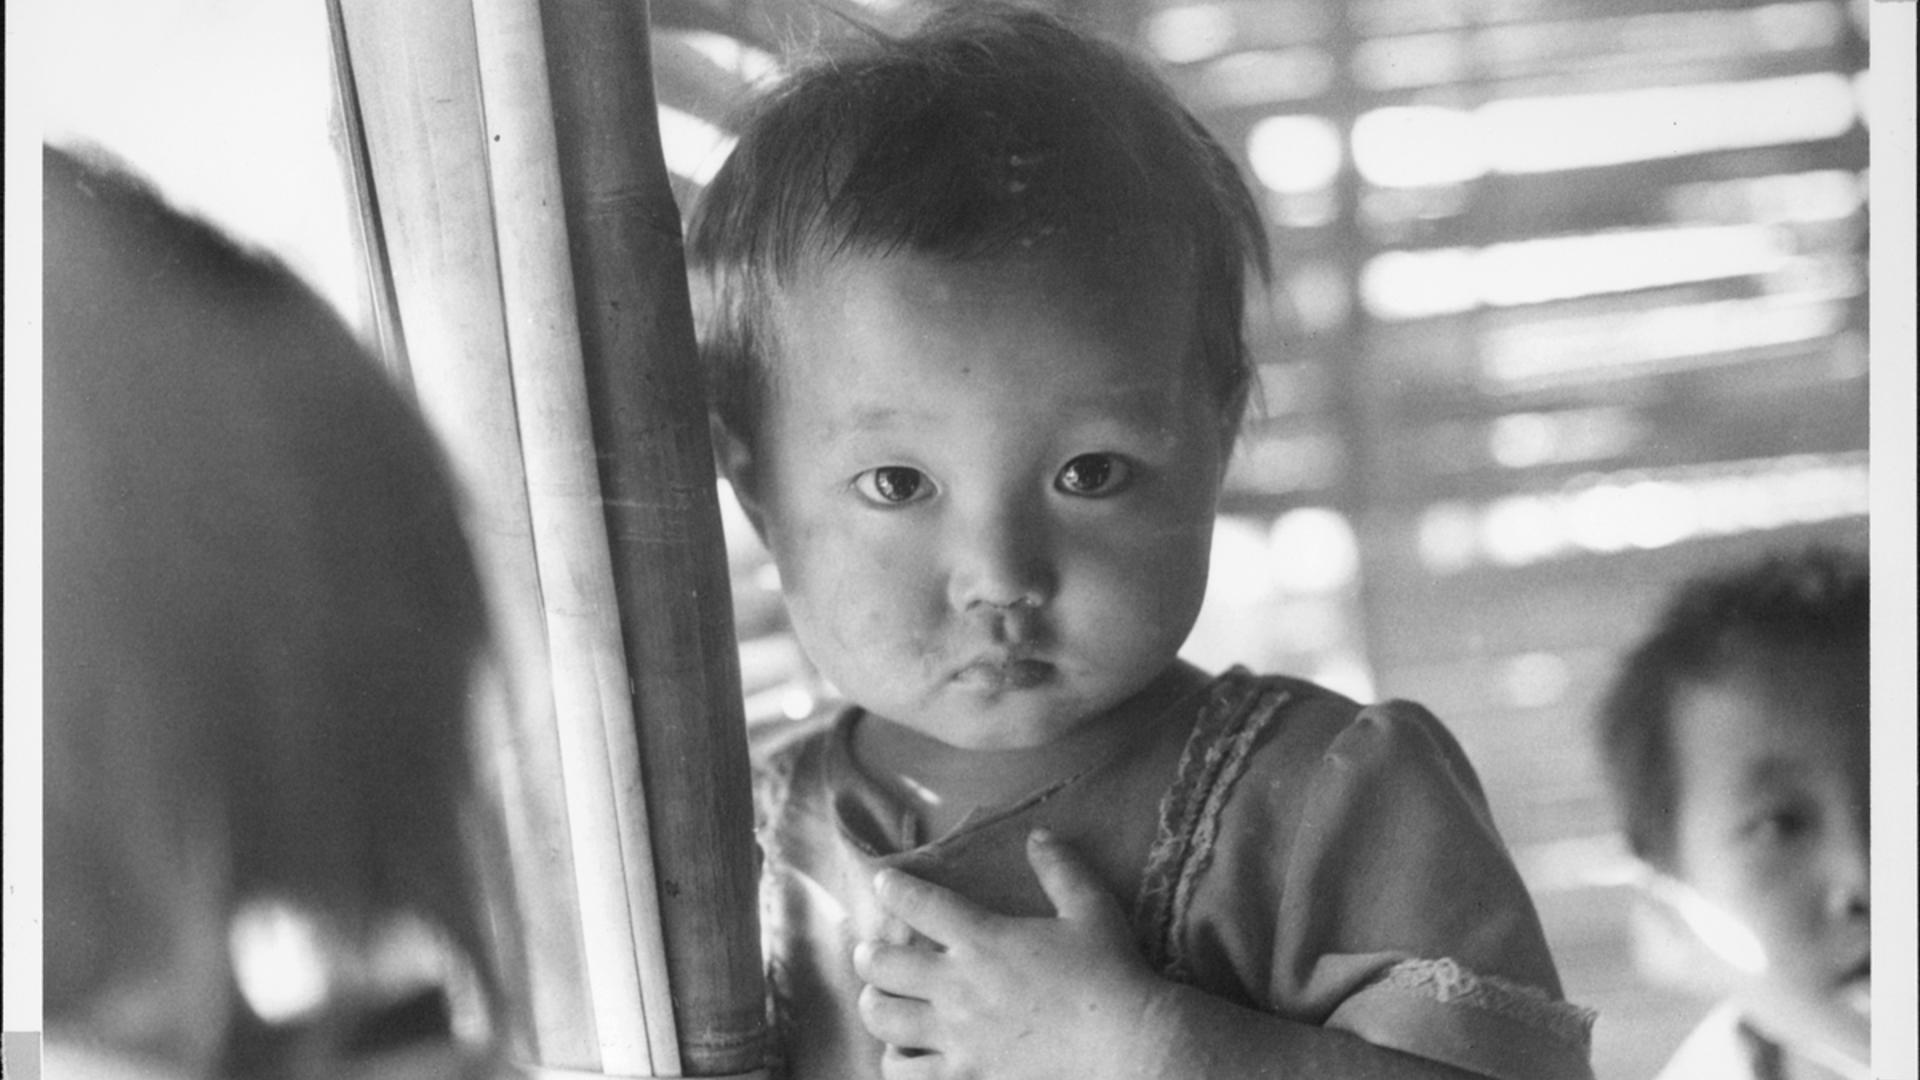 A young girl from Southeast Asia looks at the camera with a serious expression.